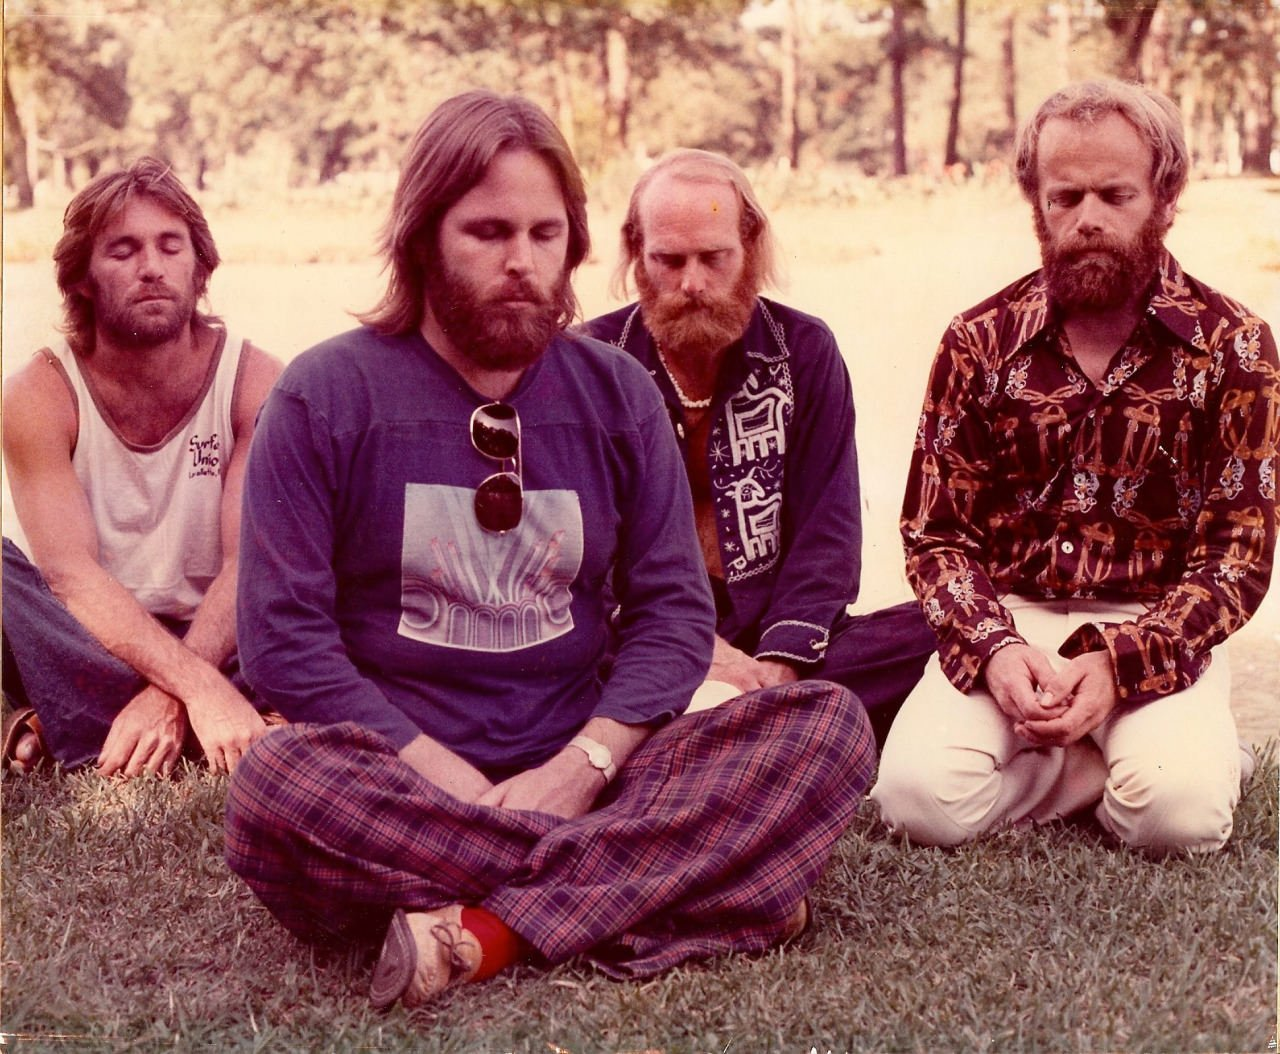 The Beach Boys played at the Jeppesen Stadium in Houston, TX. Here they are meditating backstage. 1974.